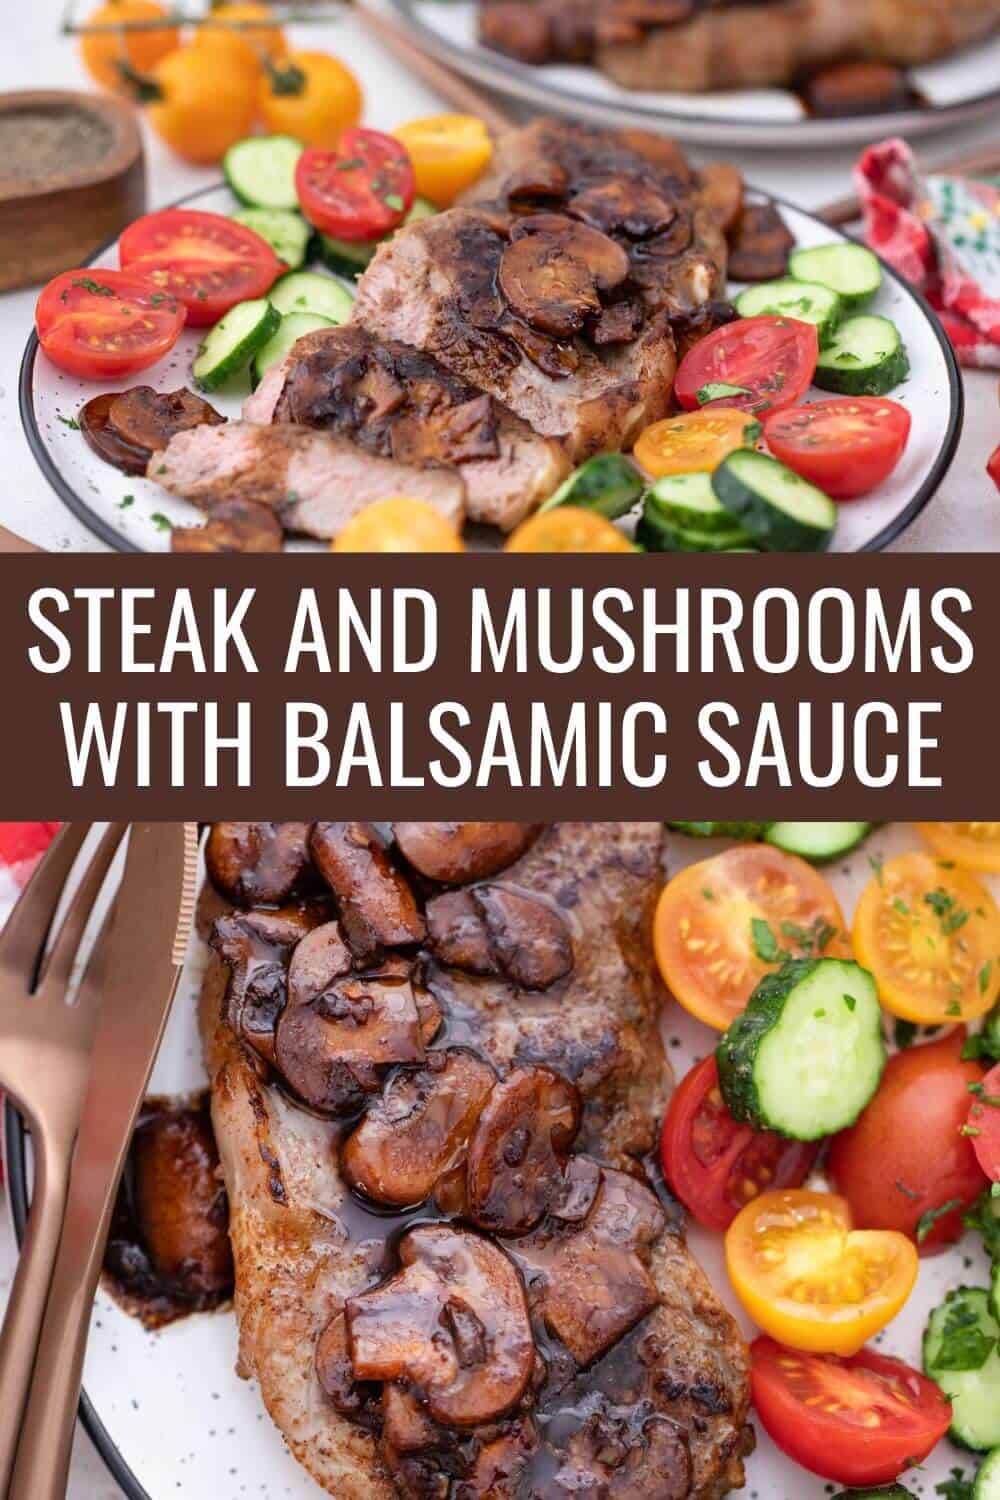 Steak and mushrooms with balsamic sauce.